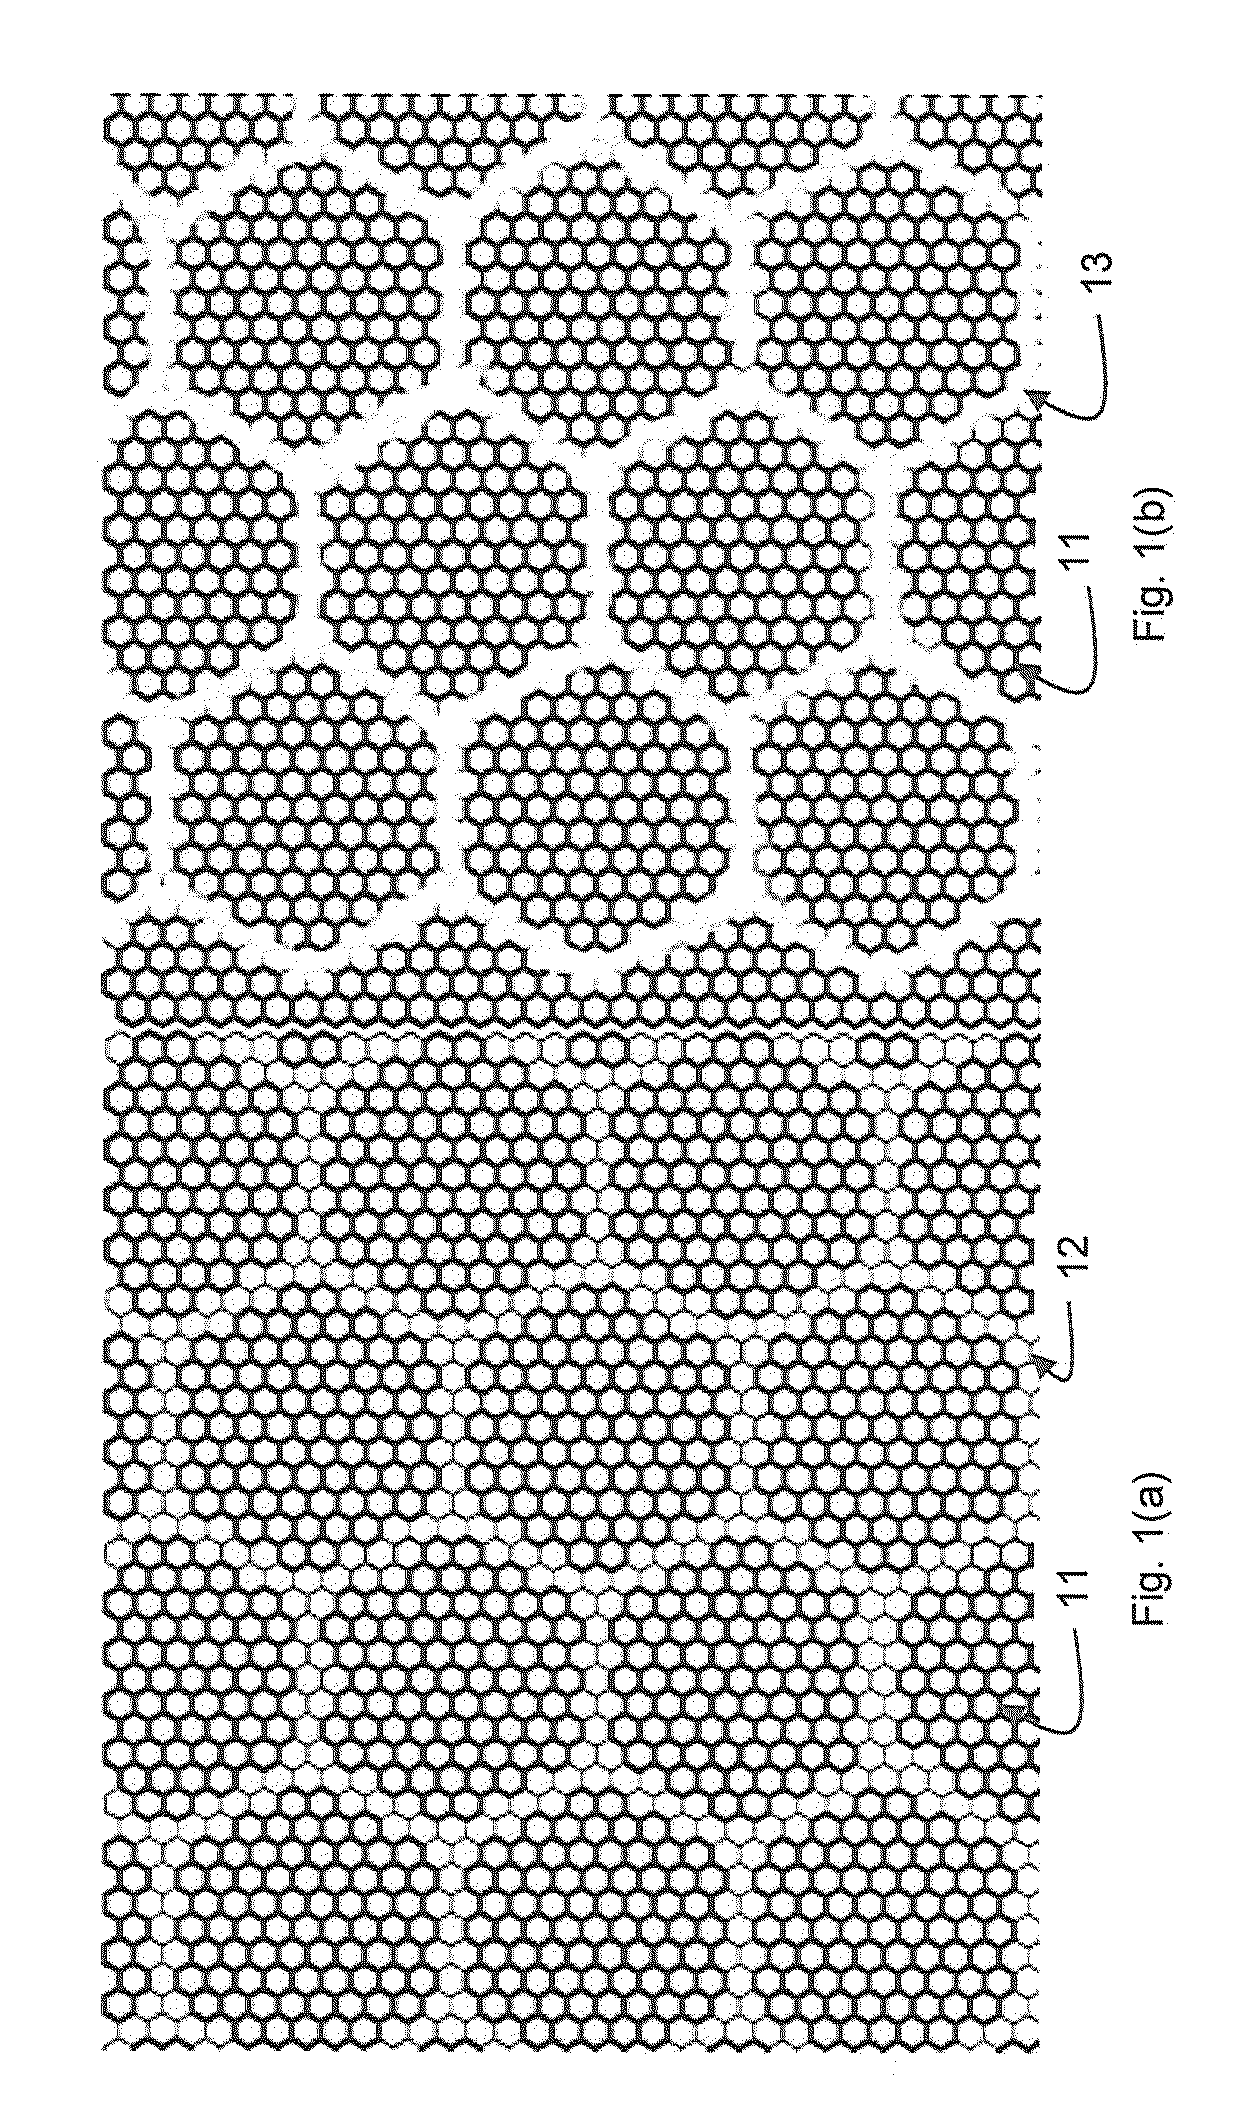 Supporting and Forming Transitional Material for Use in Supporting Prosthesis Devices, Implants and to Provide Structure in a Human Body